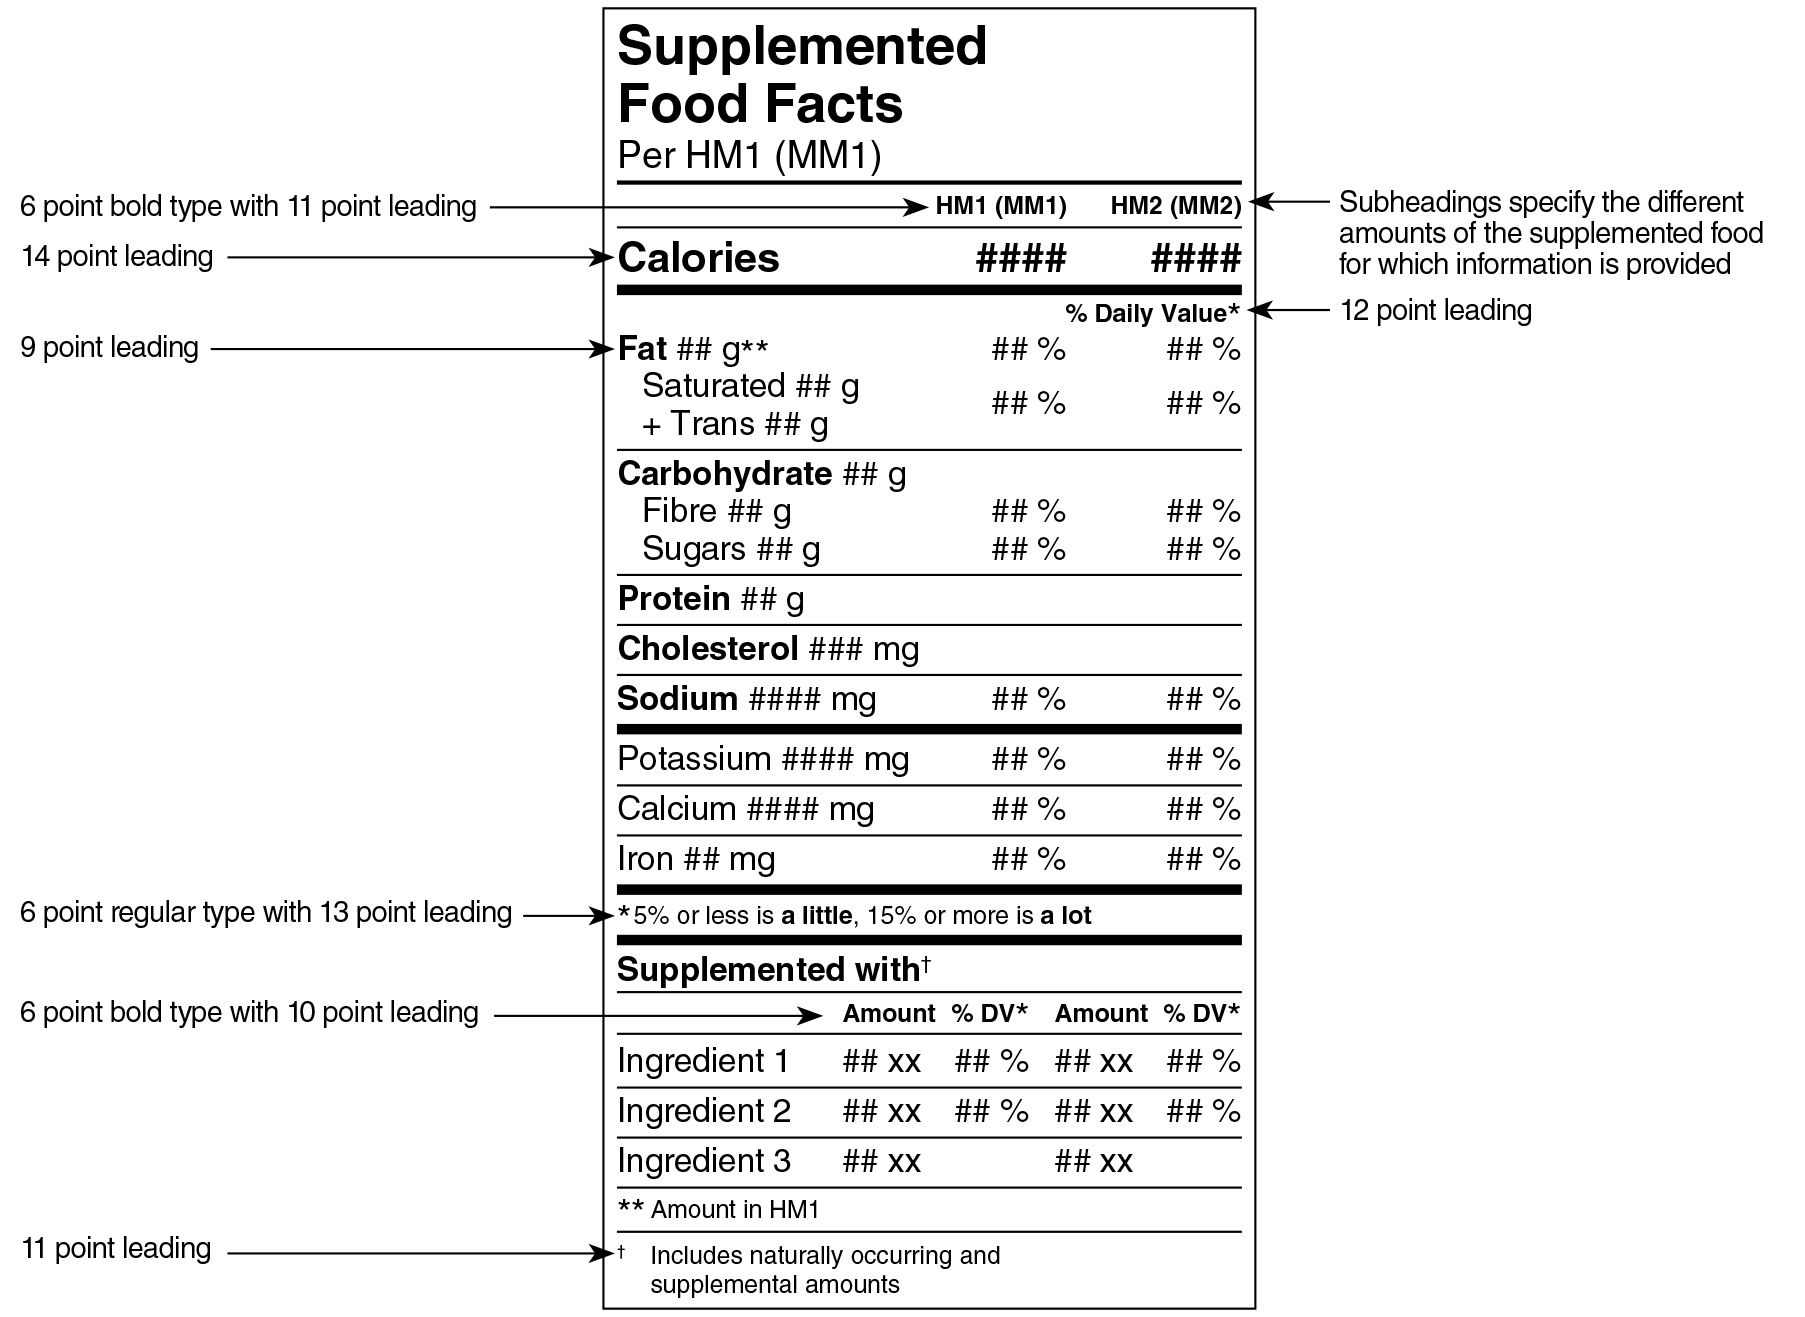 An English Supplemented Food Facts table in dual format for two serving sizes surrounded by specifications. Text version below.